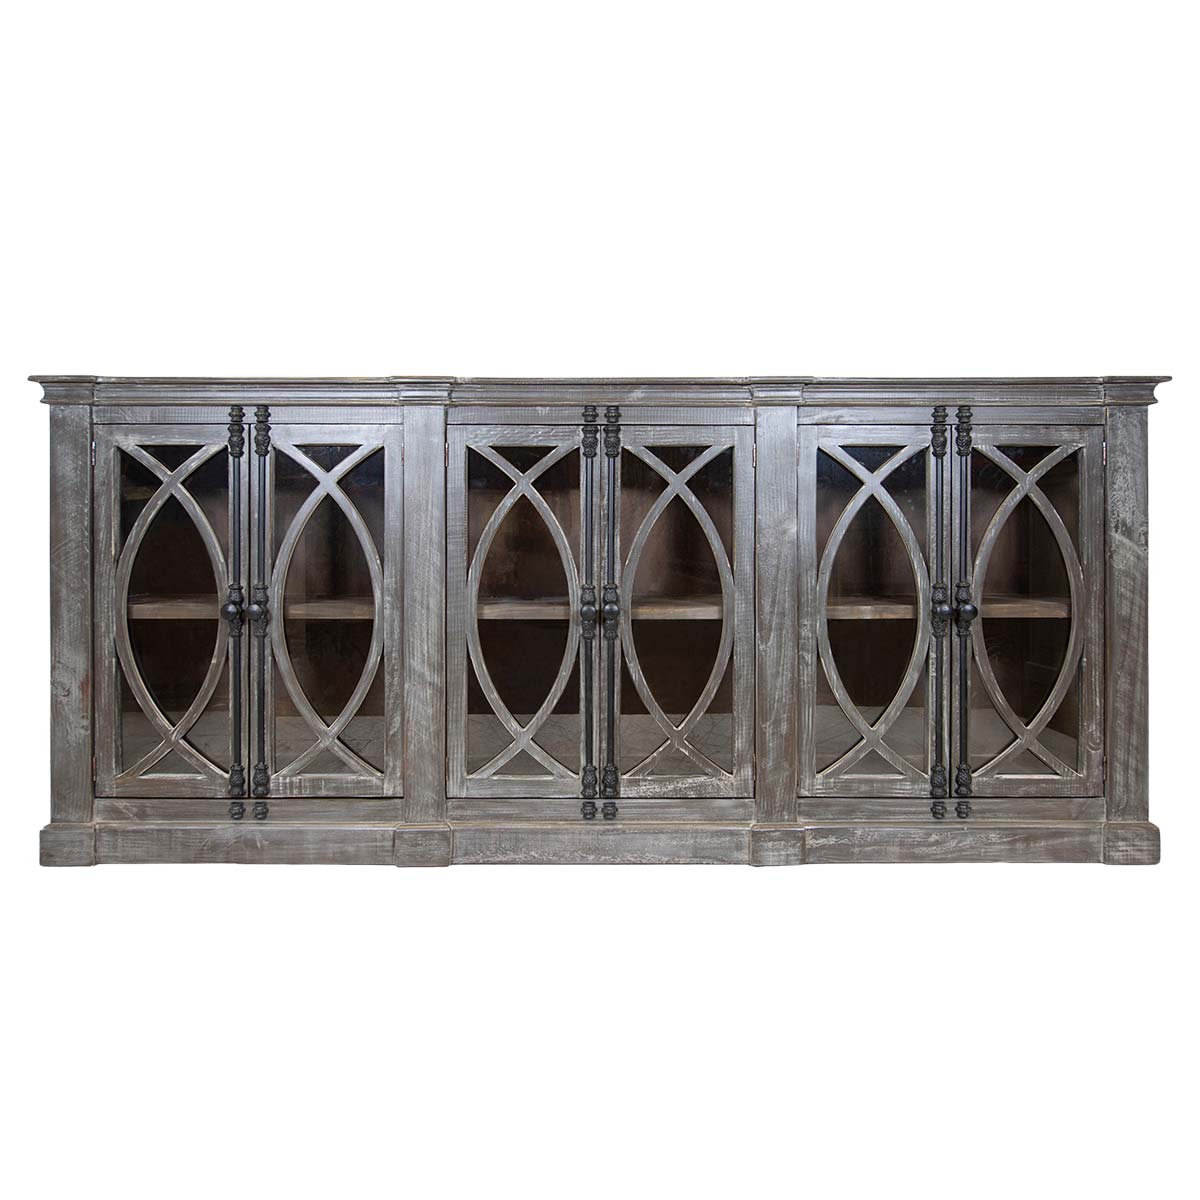 Rustic Imports Bari 6-Door Weathered Glass Console